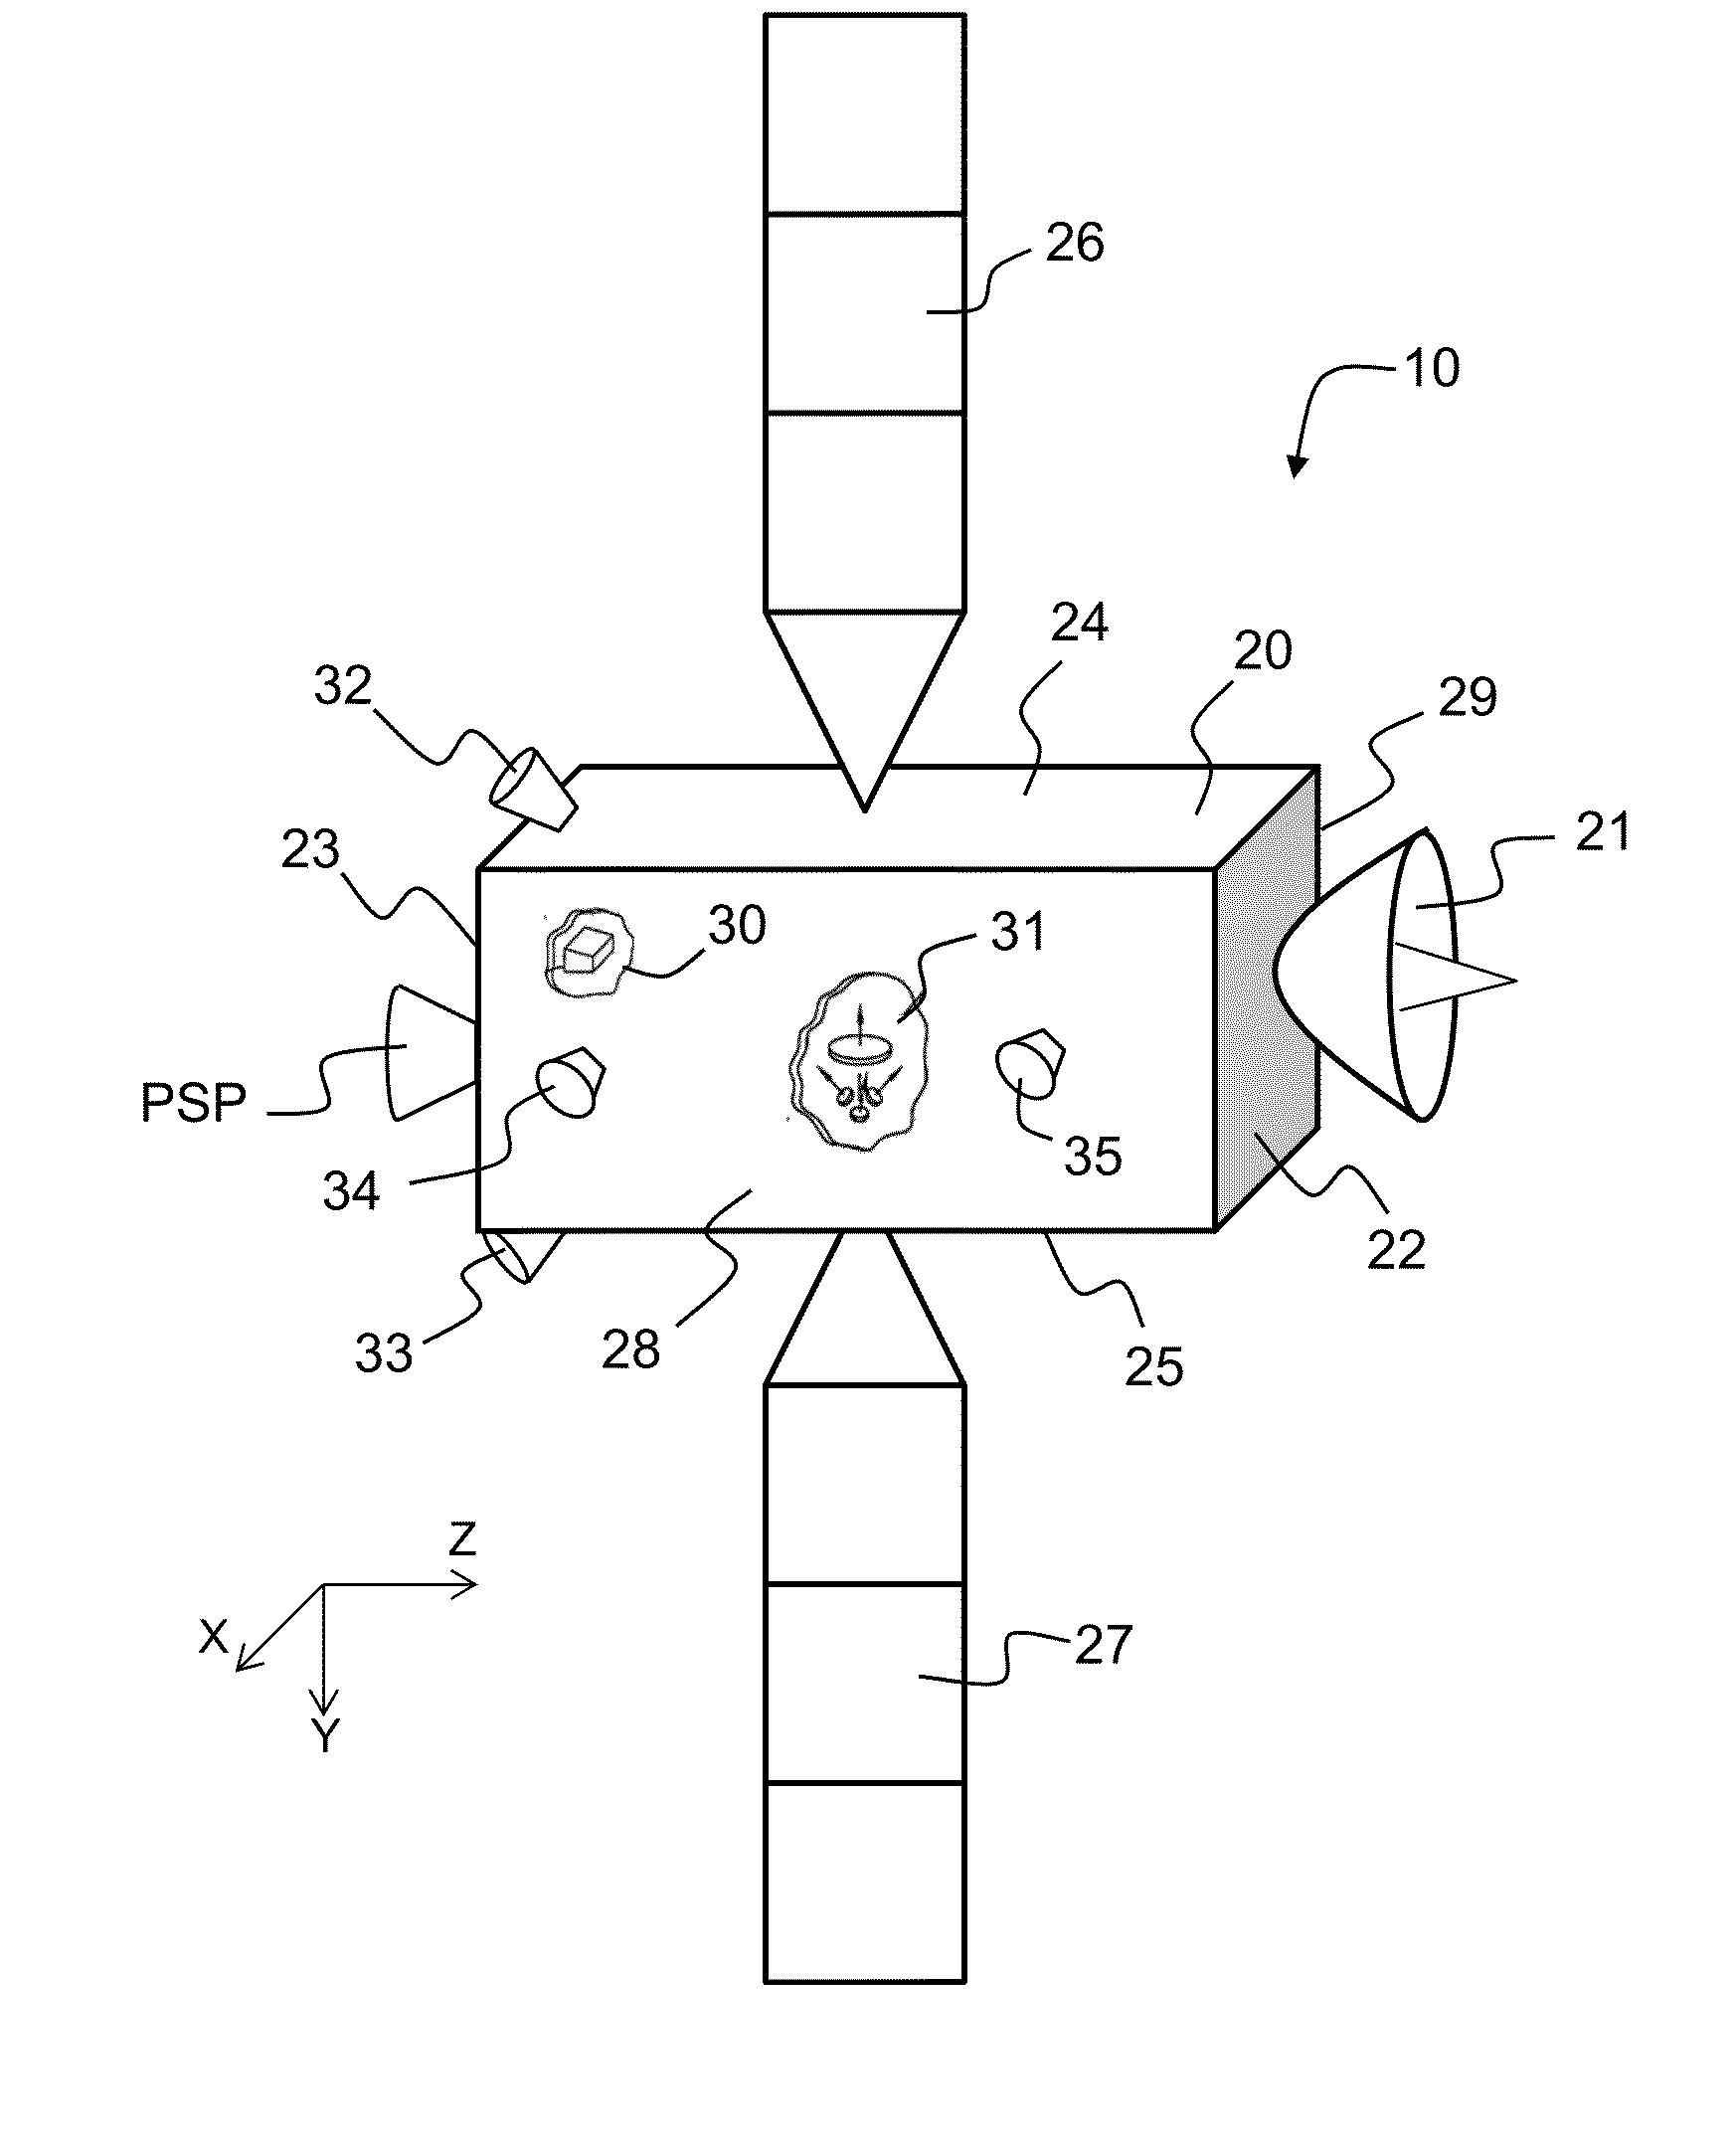 Propulsion system with four modules for satellite orbit control and attitude control